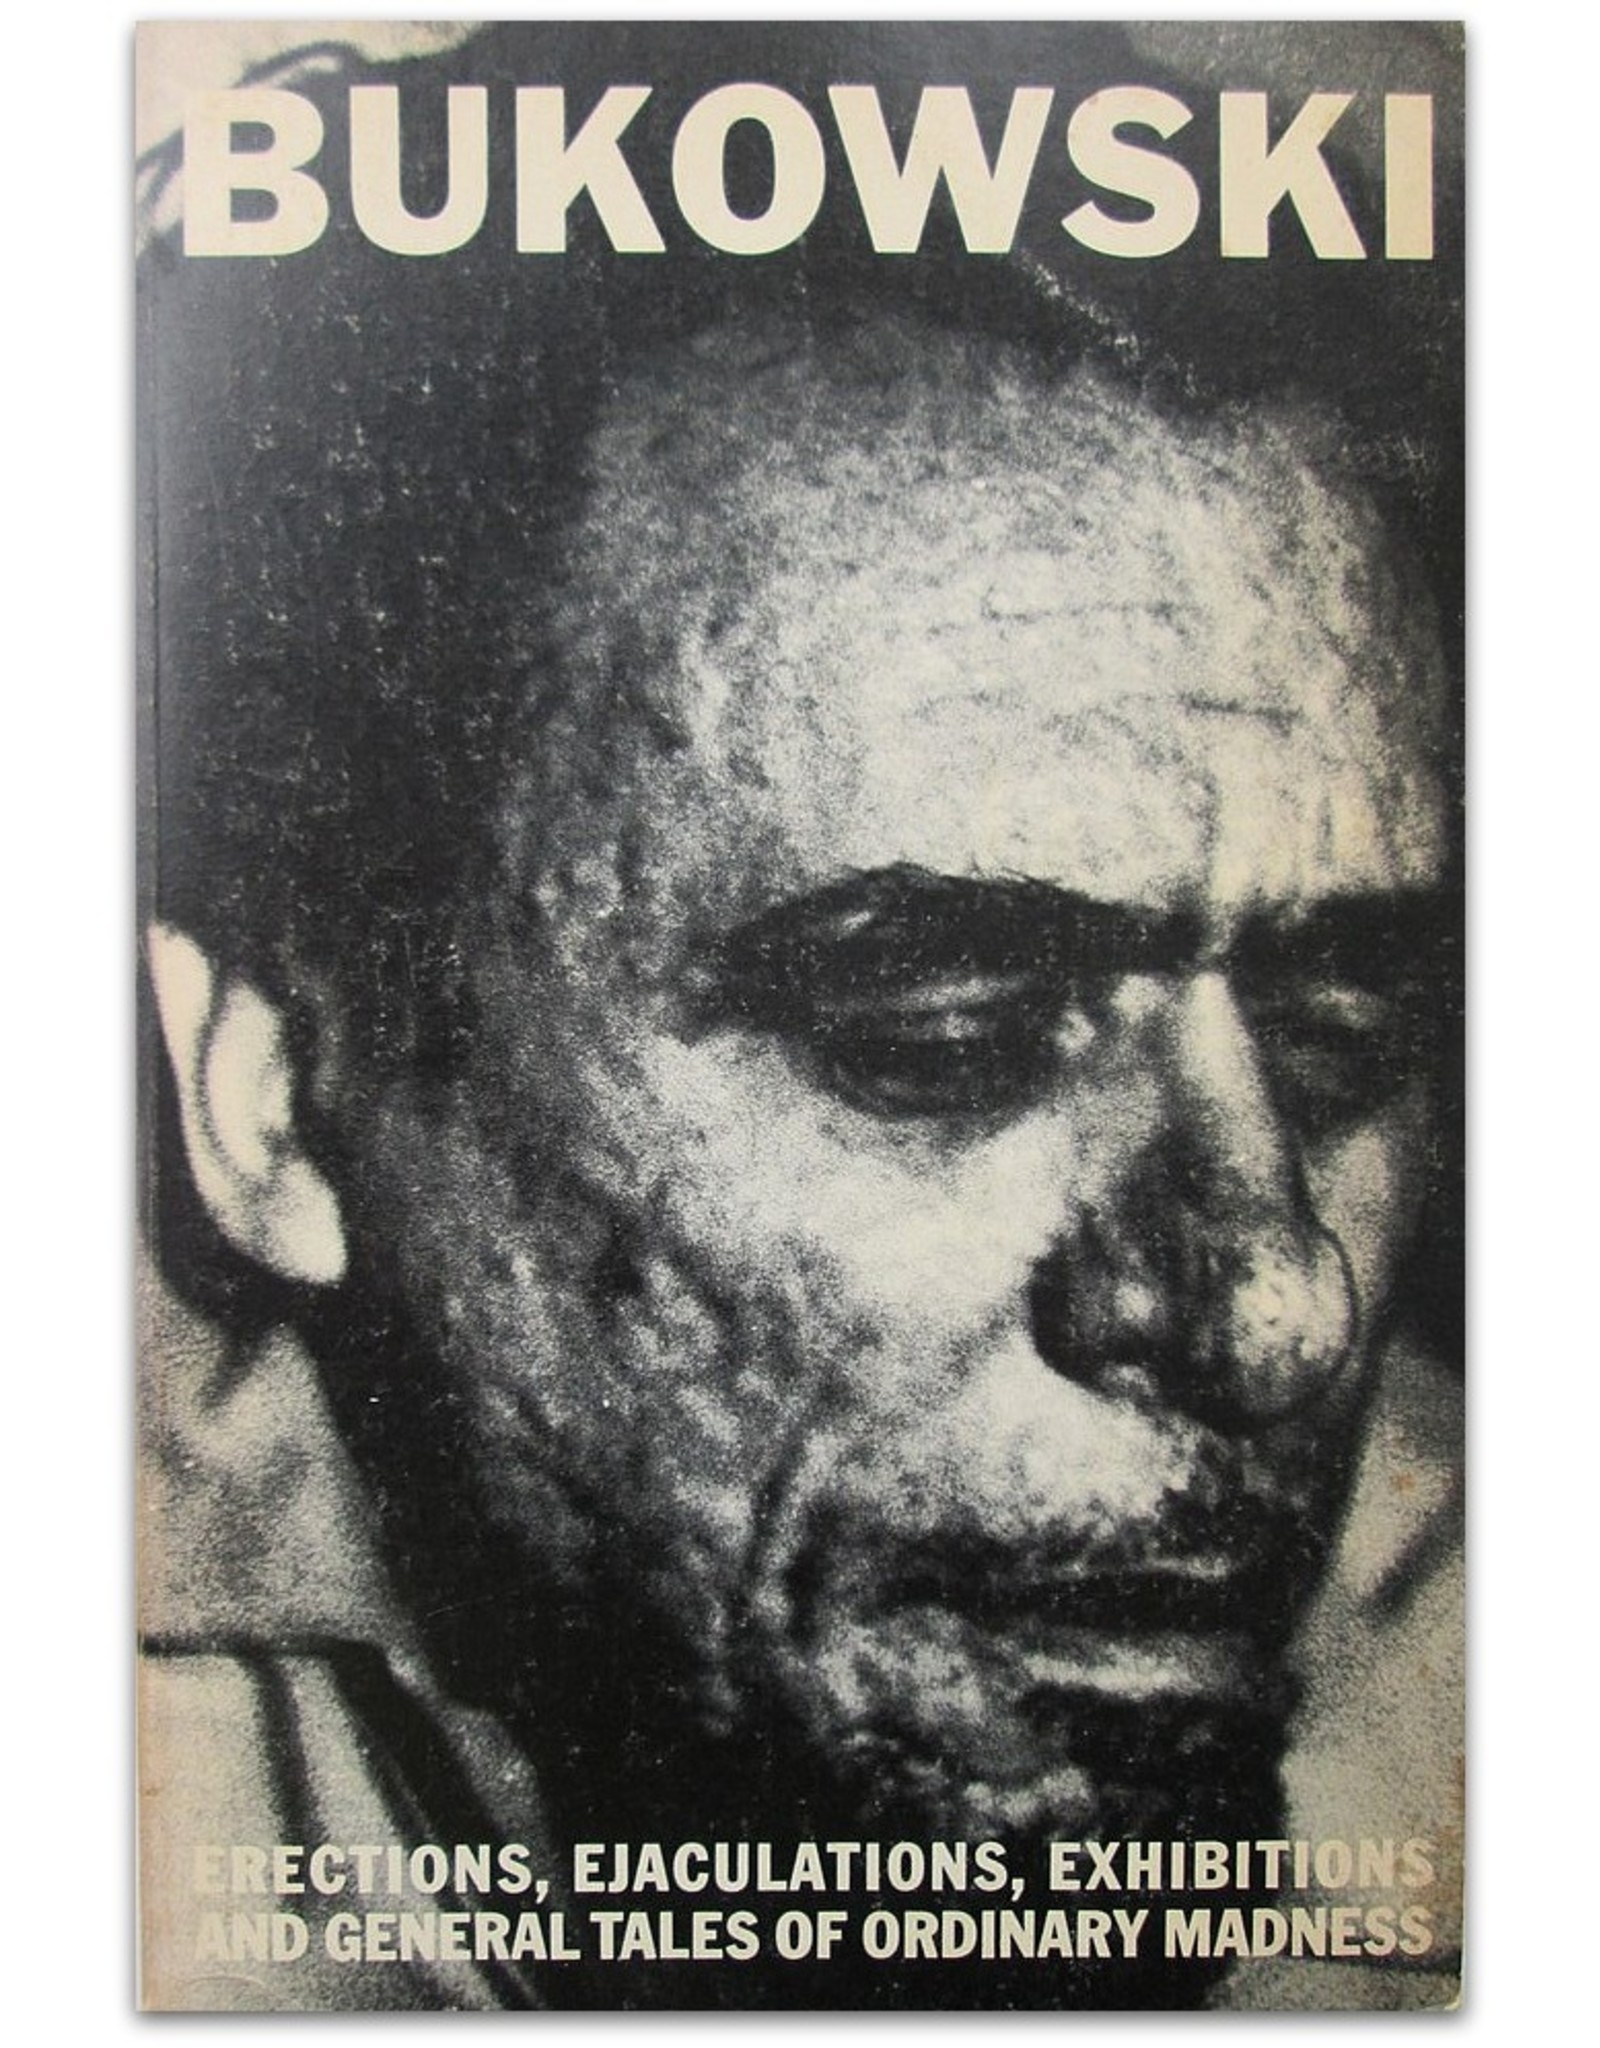 Charles Bukowski - Erections, Ejaculations, Exhibitions and General Tales of Ordinary Madness. Edited by Gail Chiarrello